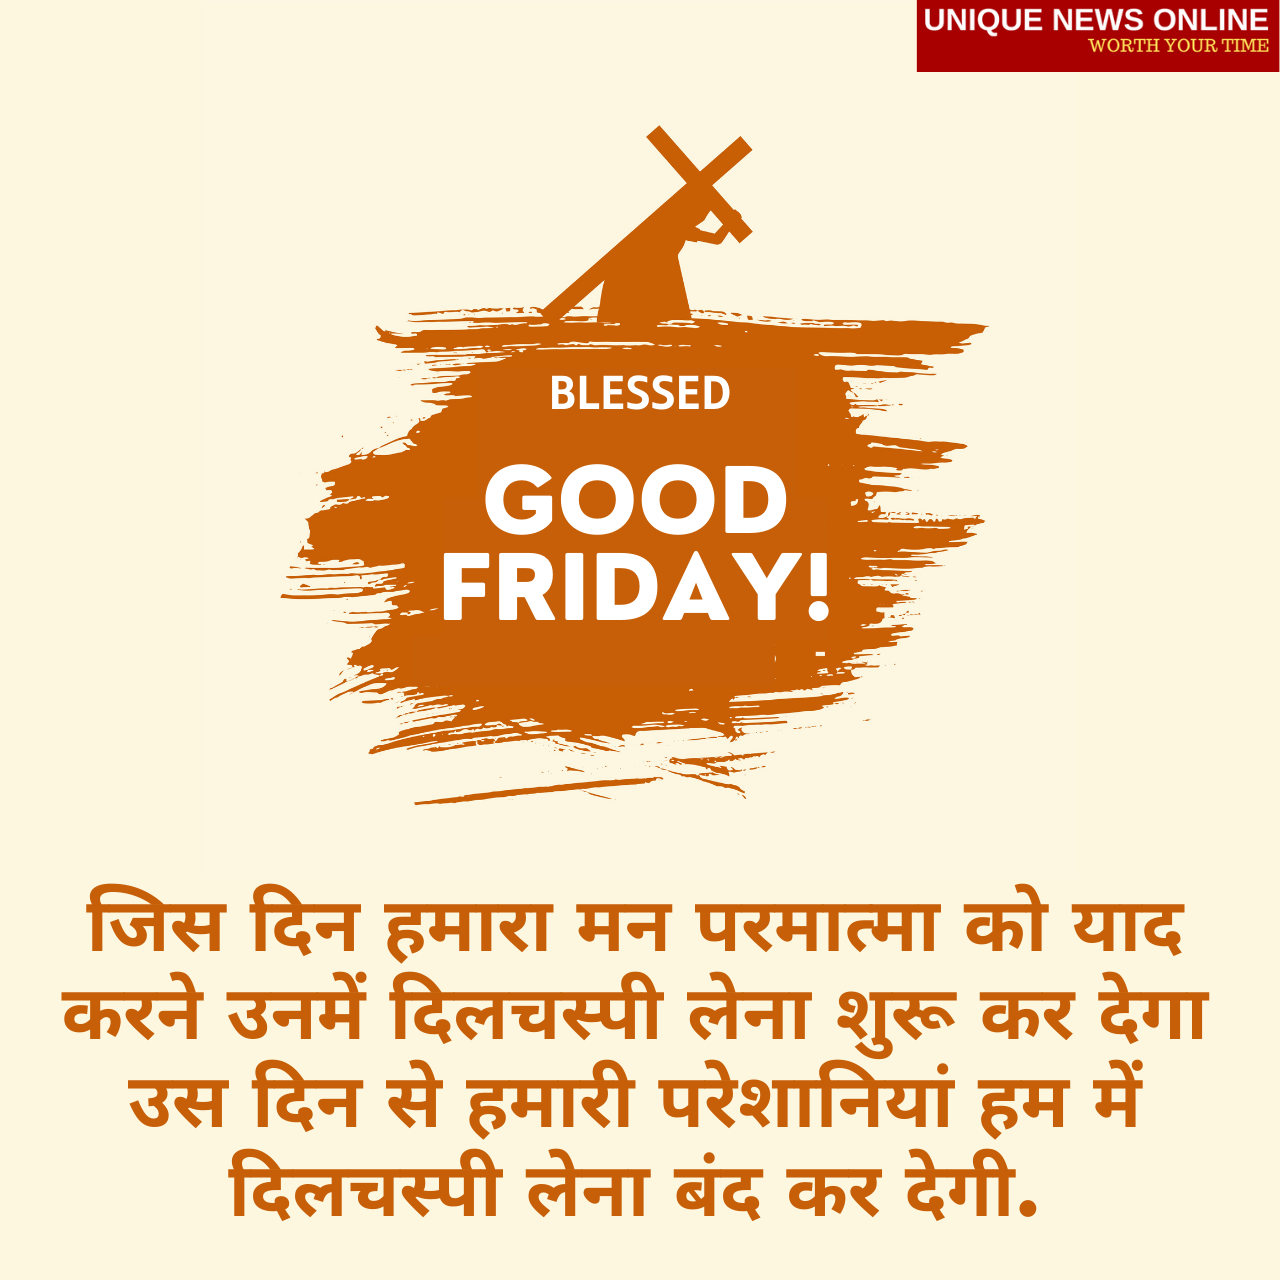 Good Friday 2021 Wishes in Hindi, Messages, Greetings, Quotes, and Images to Share